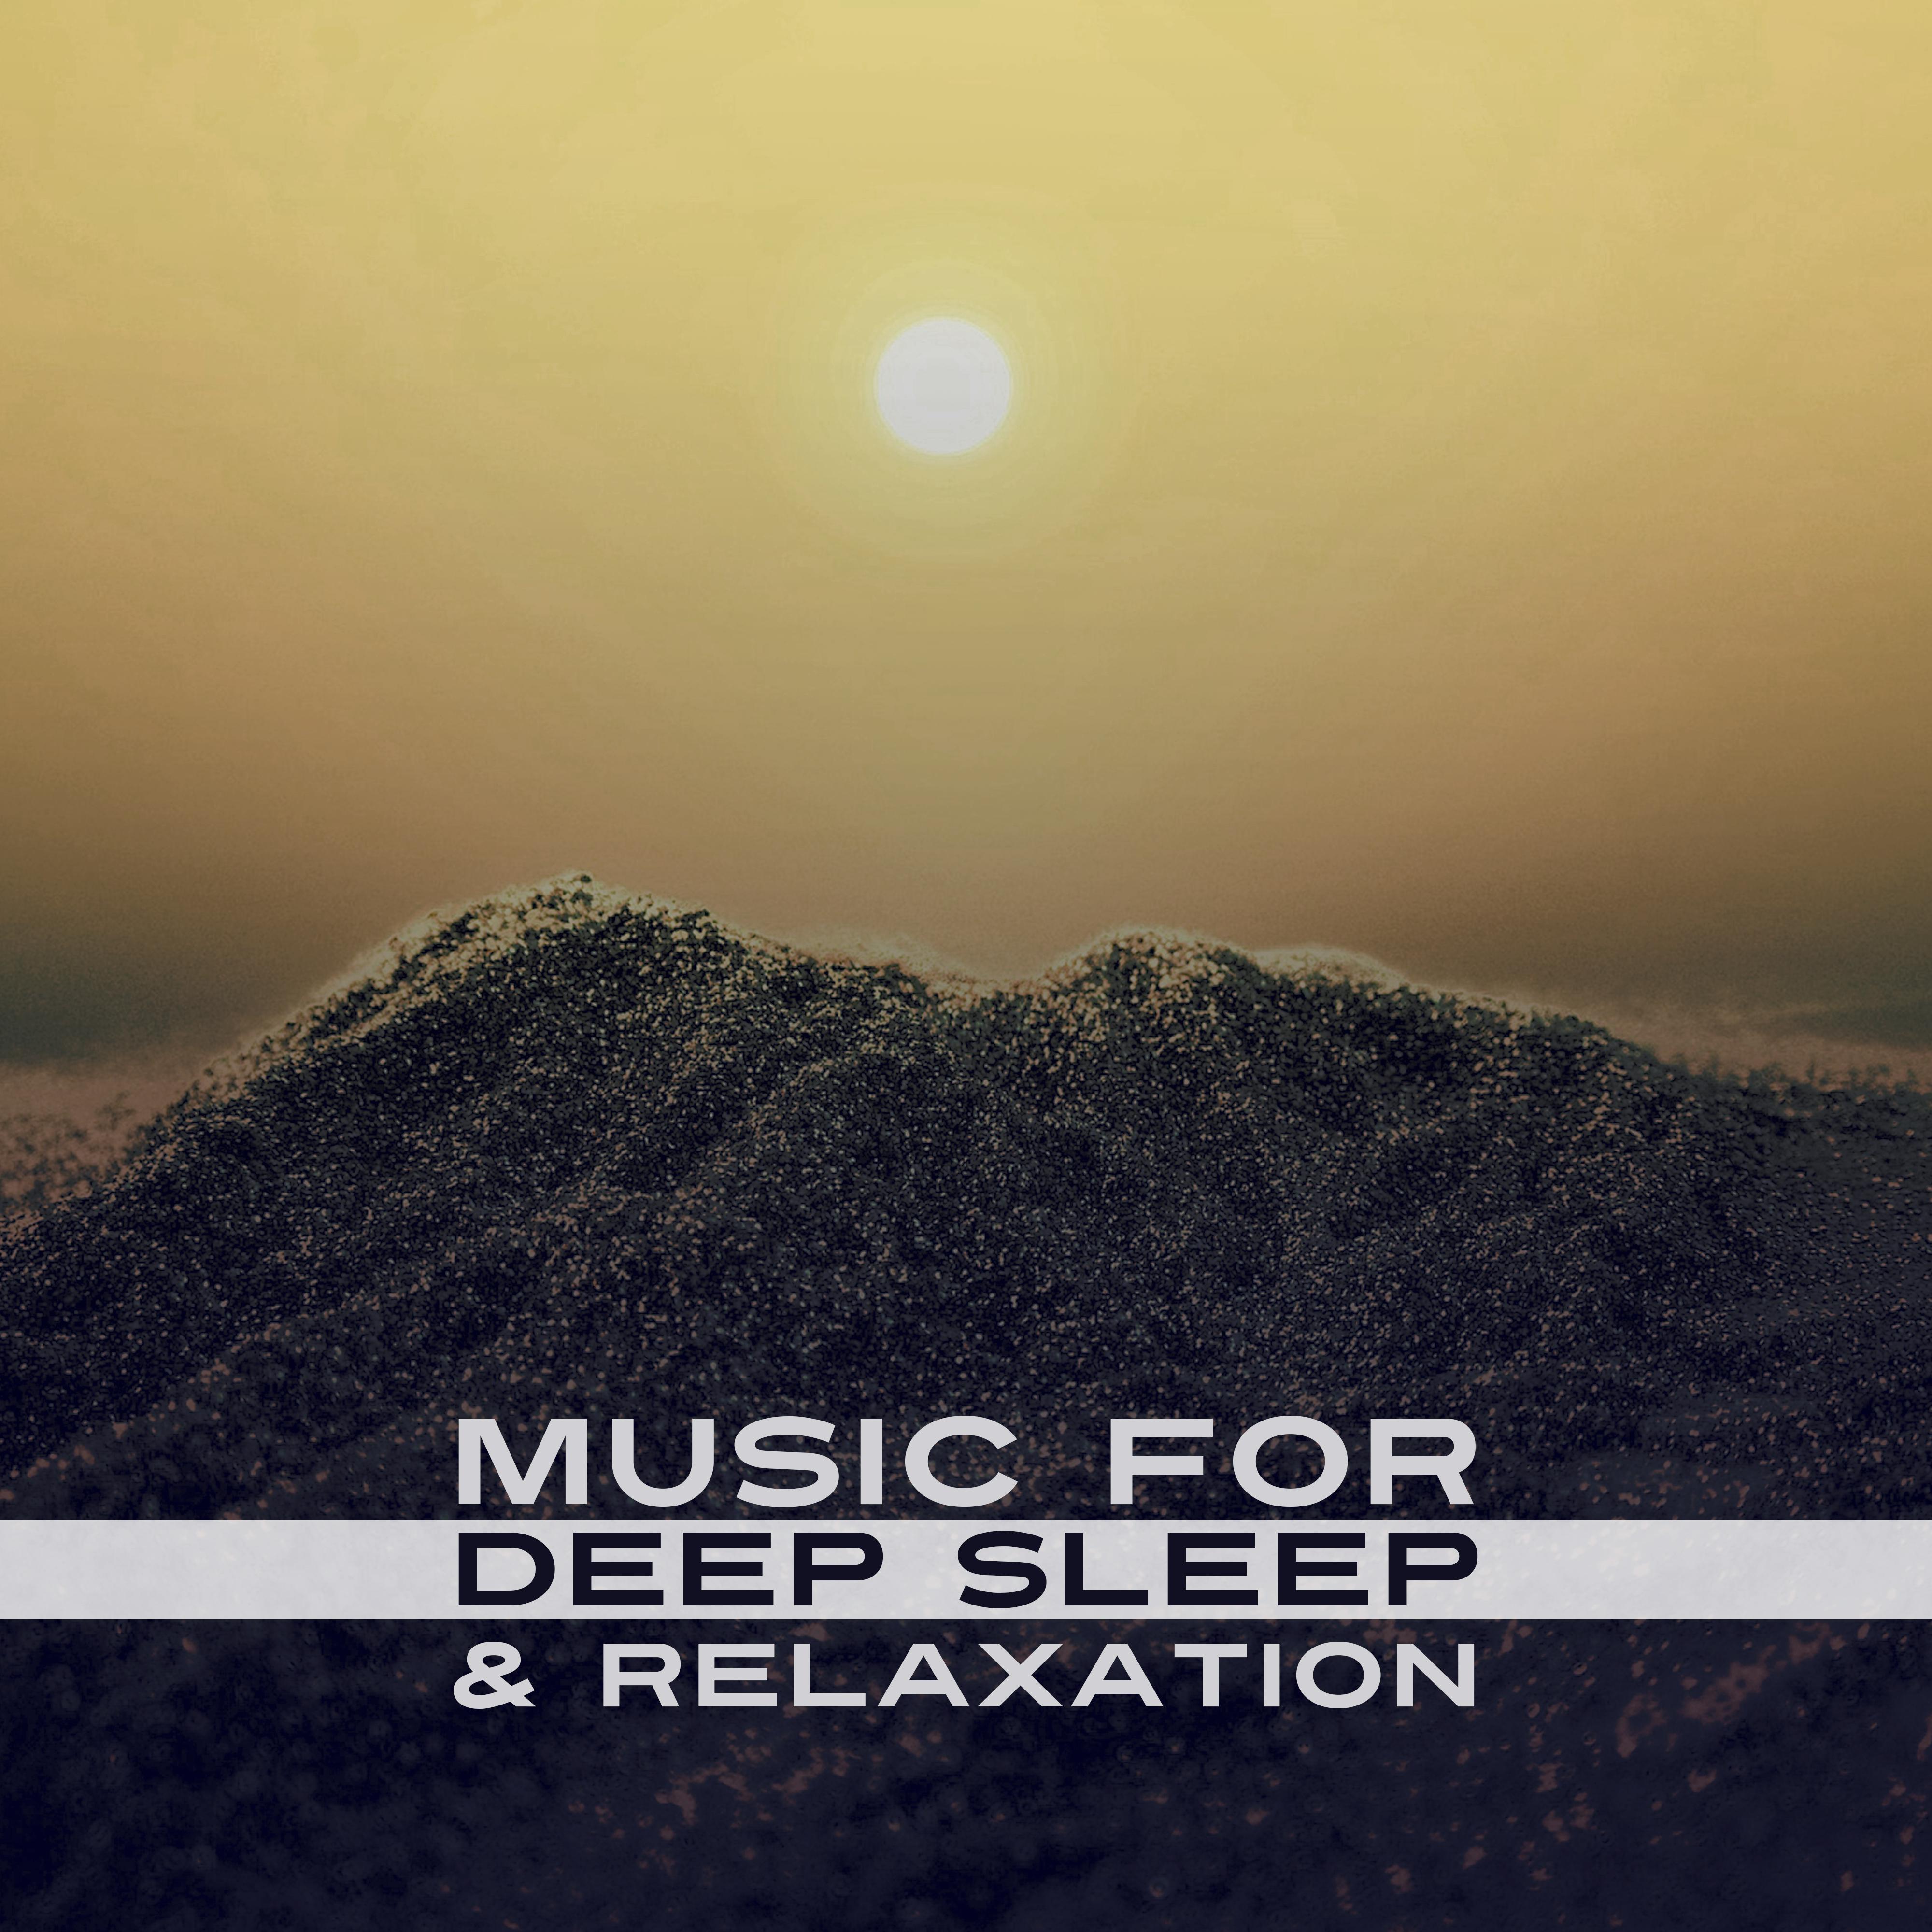 Music for Deep Sleep  Relaxation  Calming Waves, Soothing Sounds, Easy Listening, New Age Sounds, Music to Relax